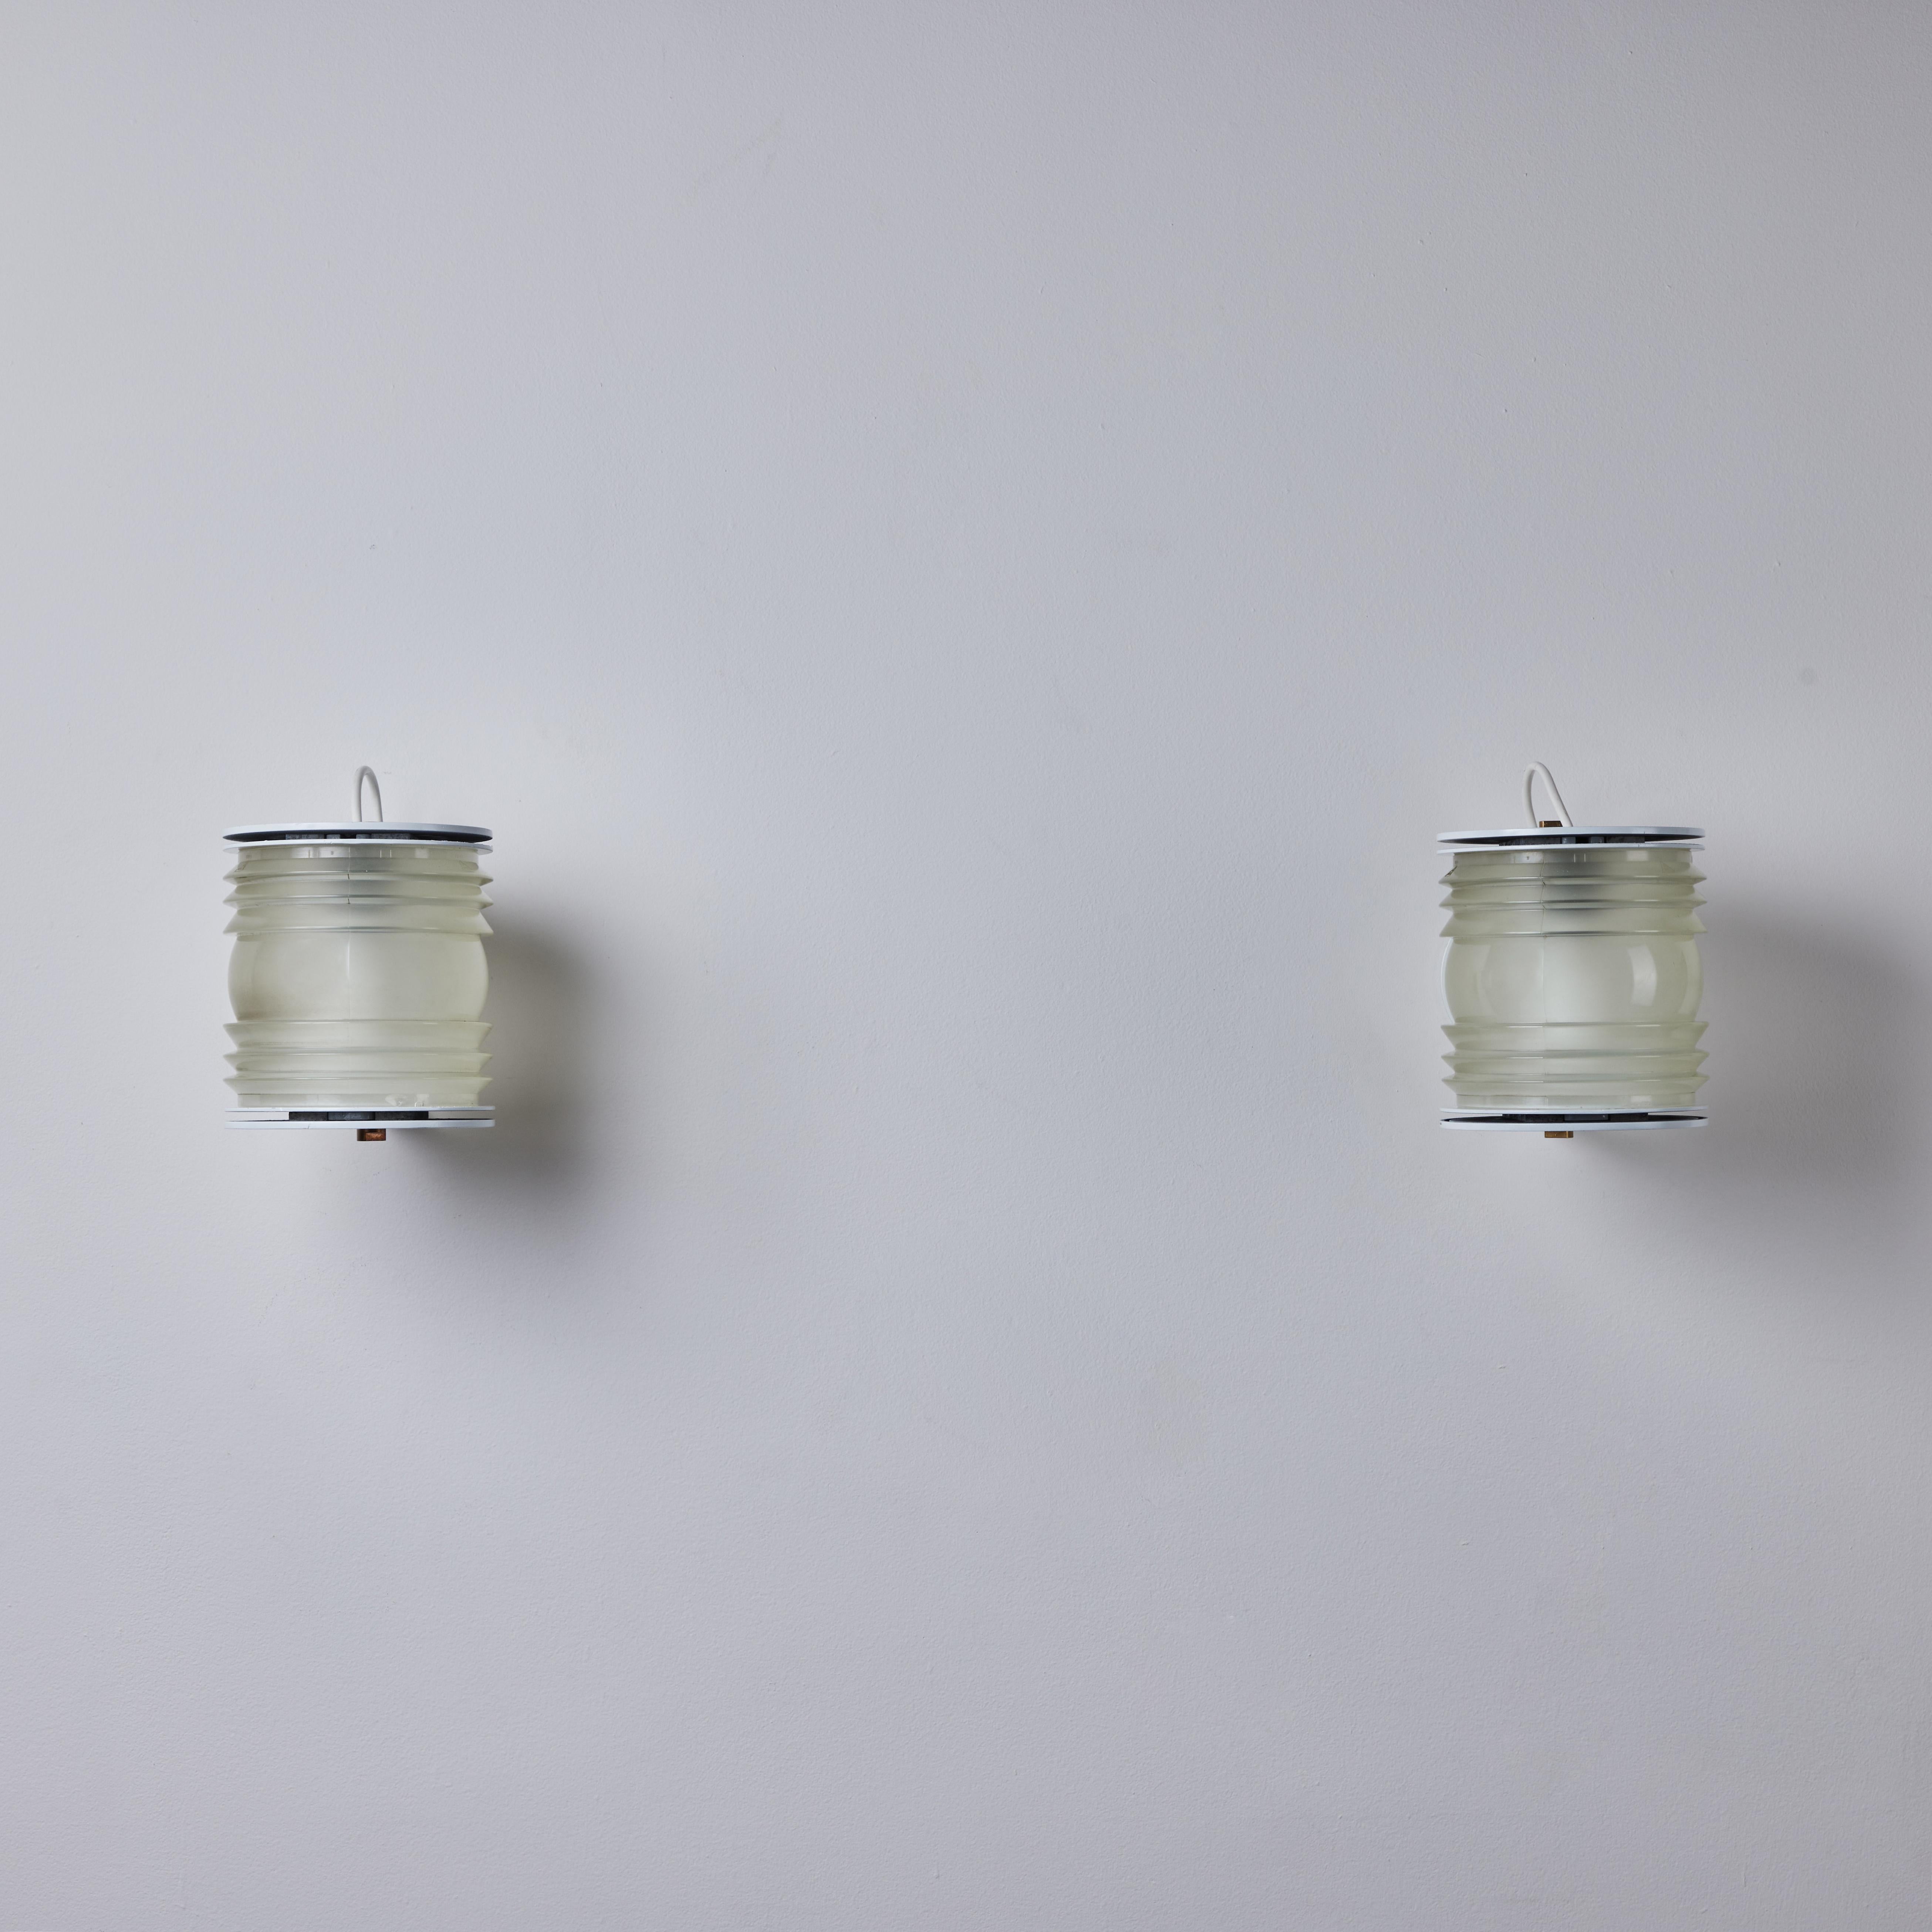 Pair of Model 1151 sconces by Joe Colombo for Oluce. Designed and manufactured in Italy circa 1965. Thick molded glass is housed between an enameled white hickey-shaped bracket. Brass finial details on top and bottom. Rewired for the US. Holds one